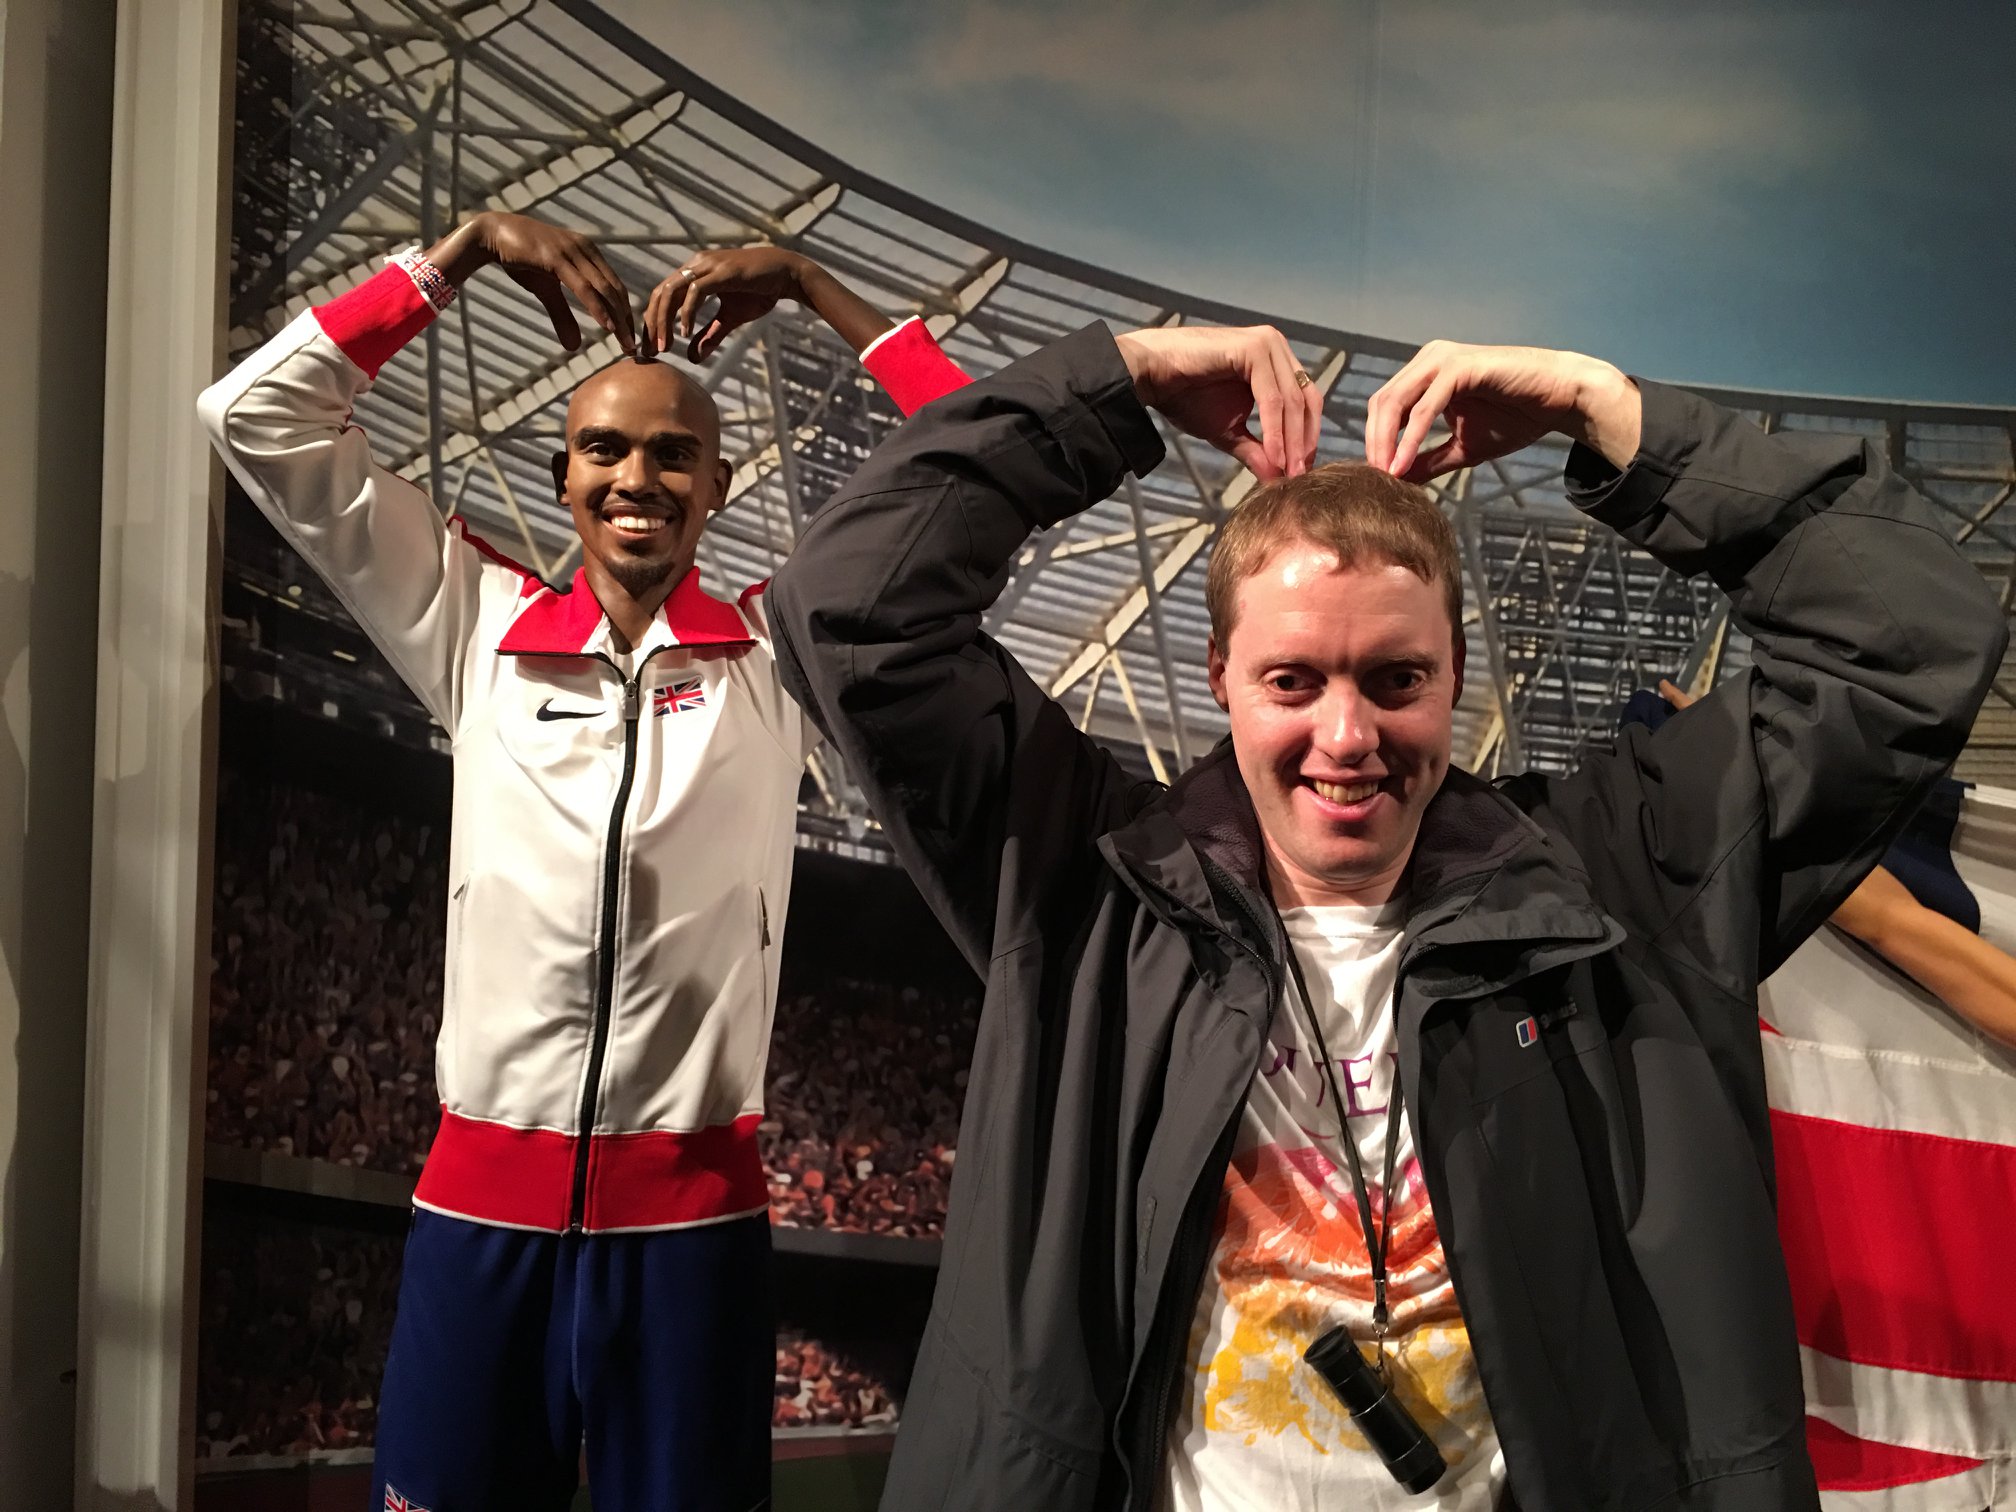 Glen next to a waxwork of Mo Farah, copying the Mobot stance that Mo is doing, placing both hands on top of his head with his fingers pointing downwards.